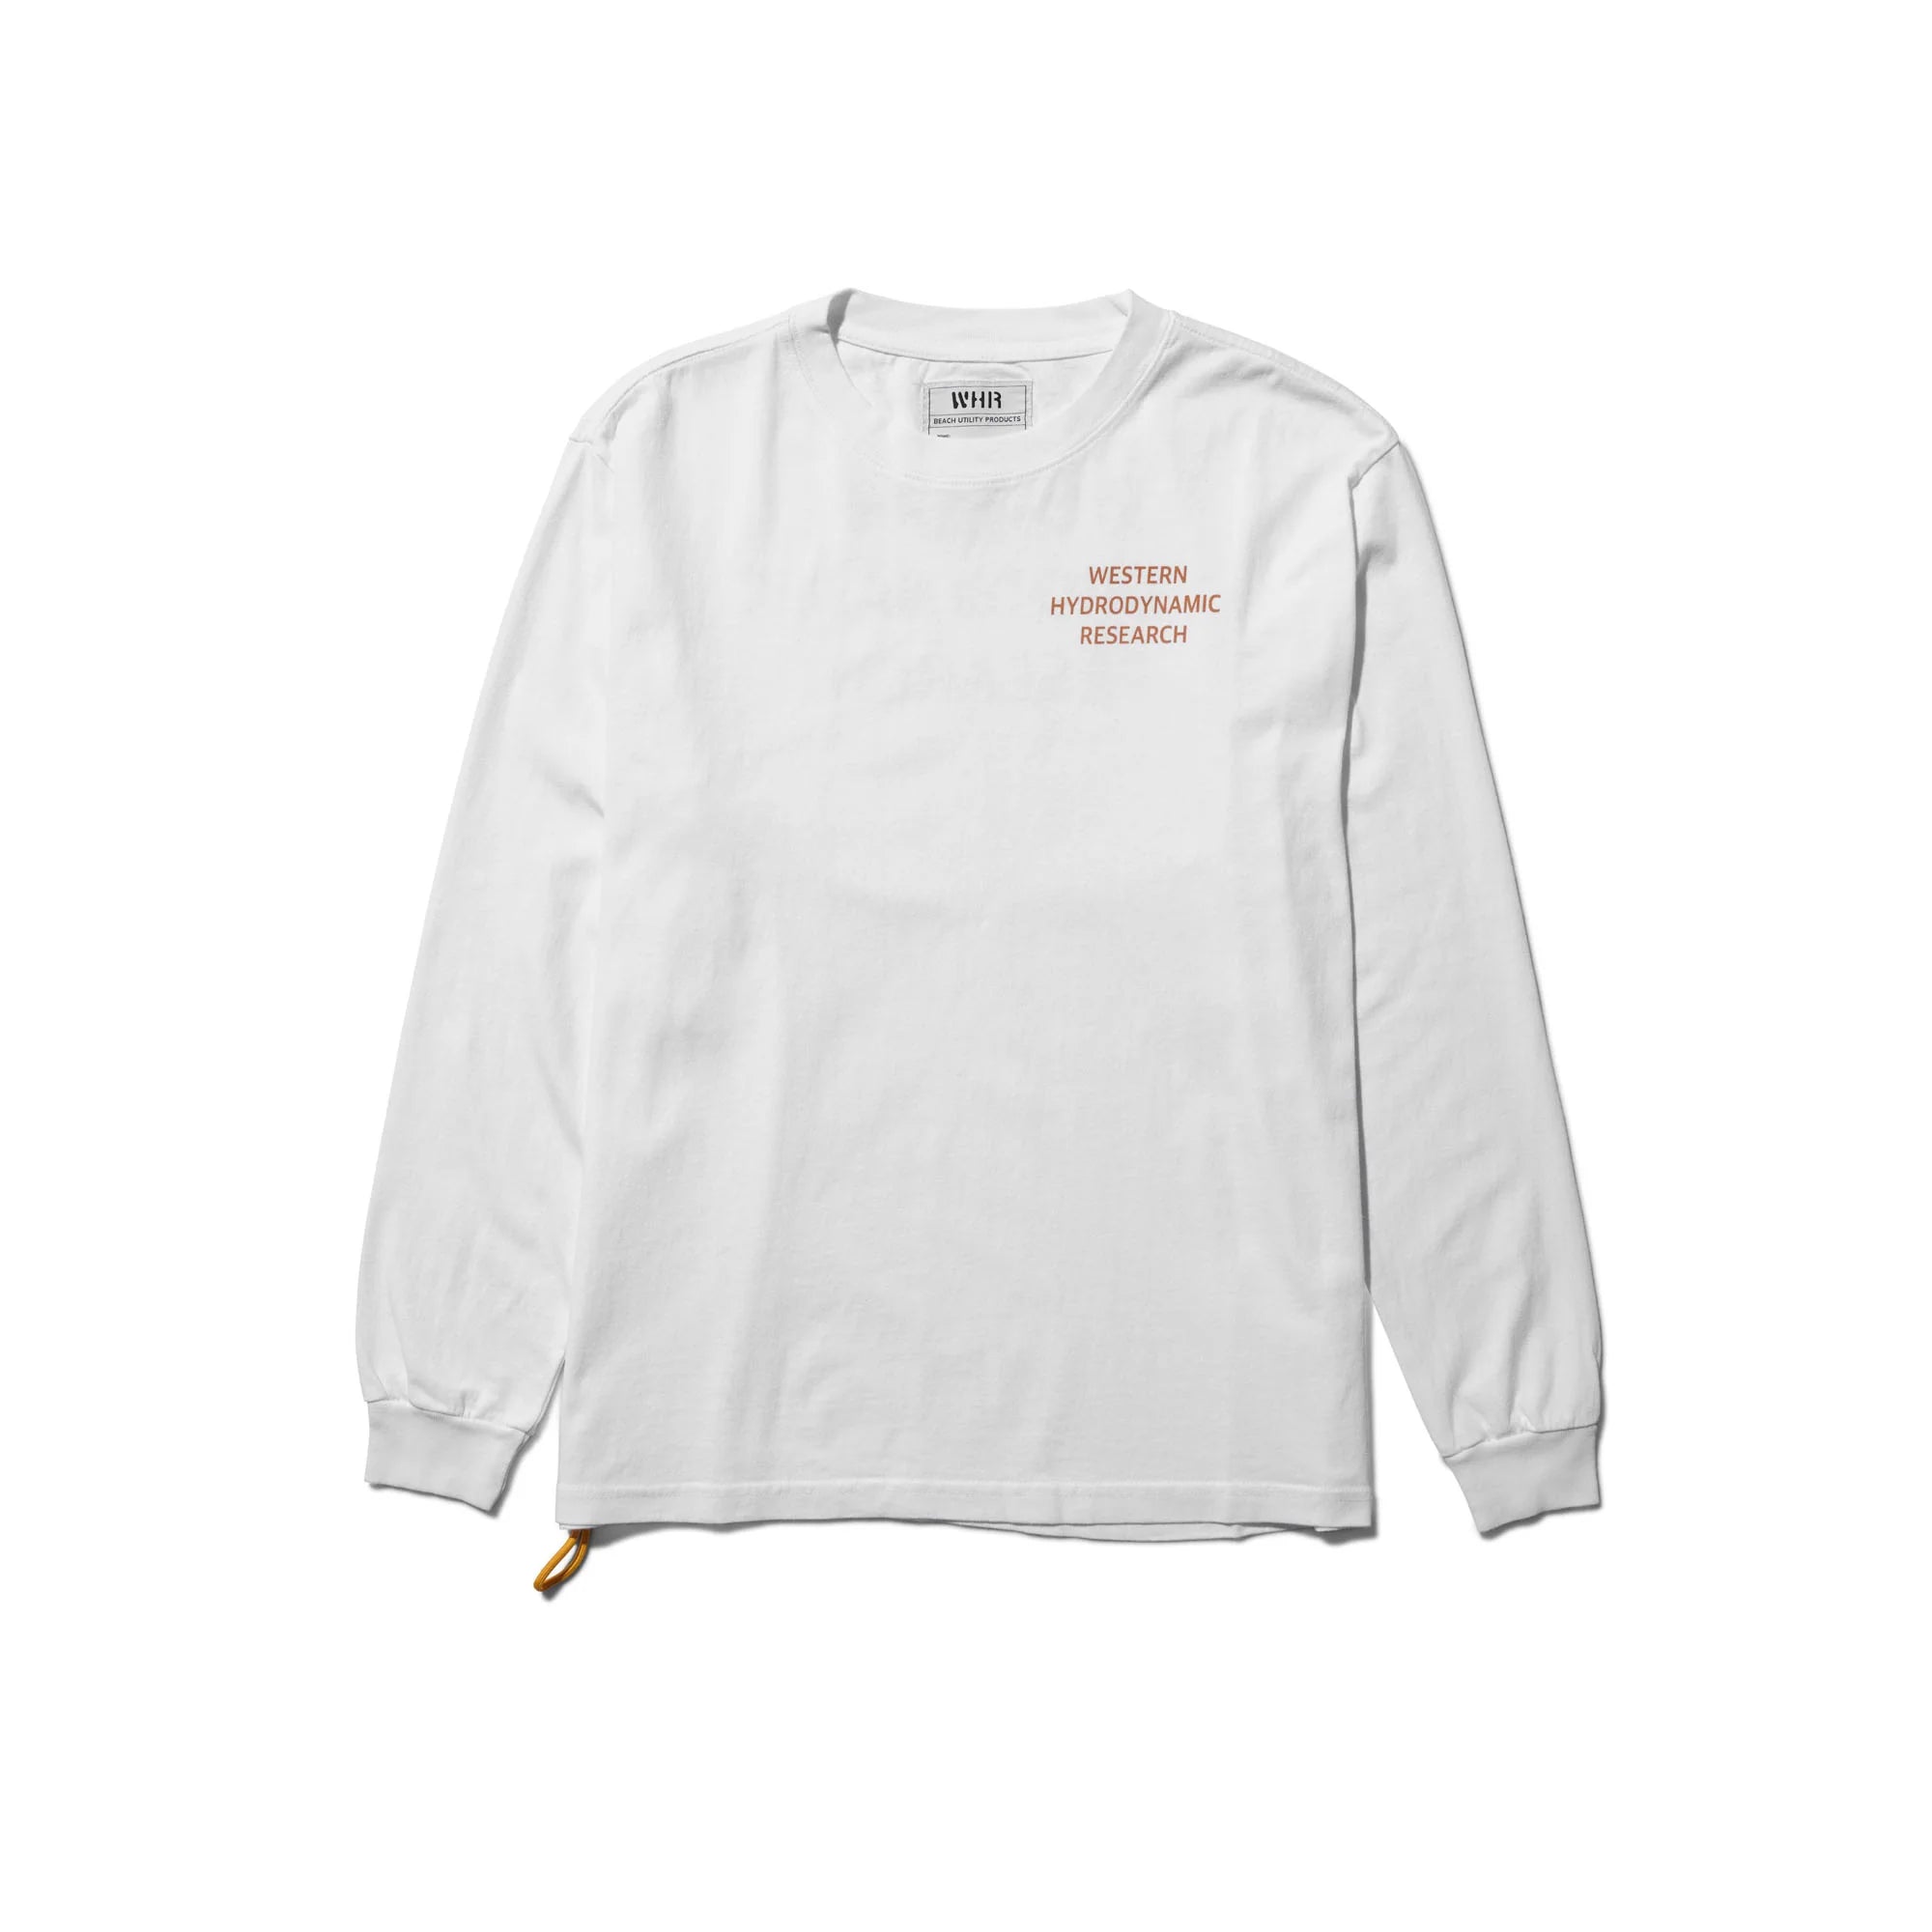 Western Hydrodynamic Research - Worker Tee (White) L/S